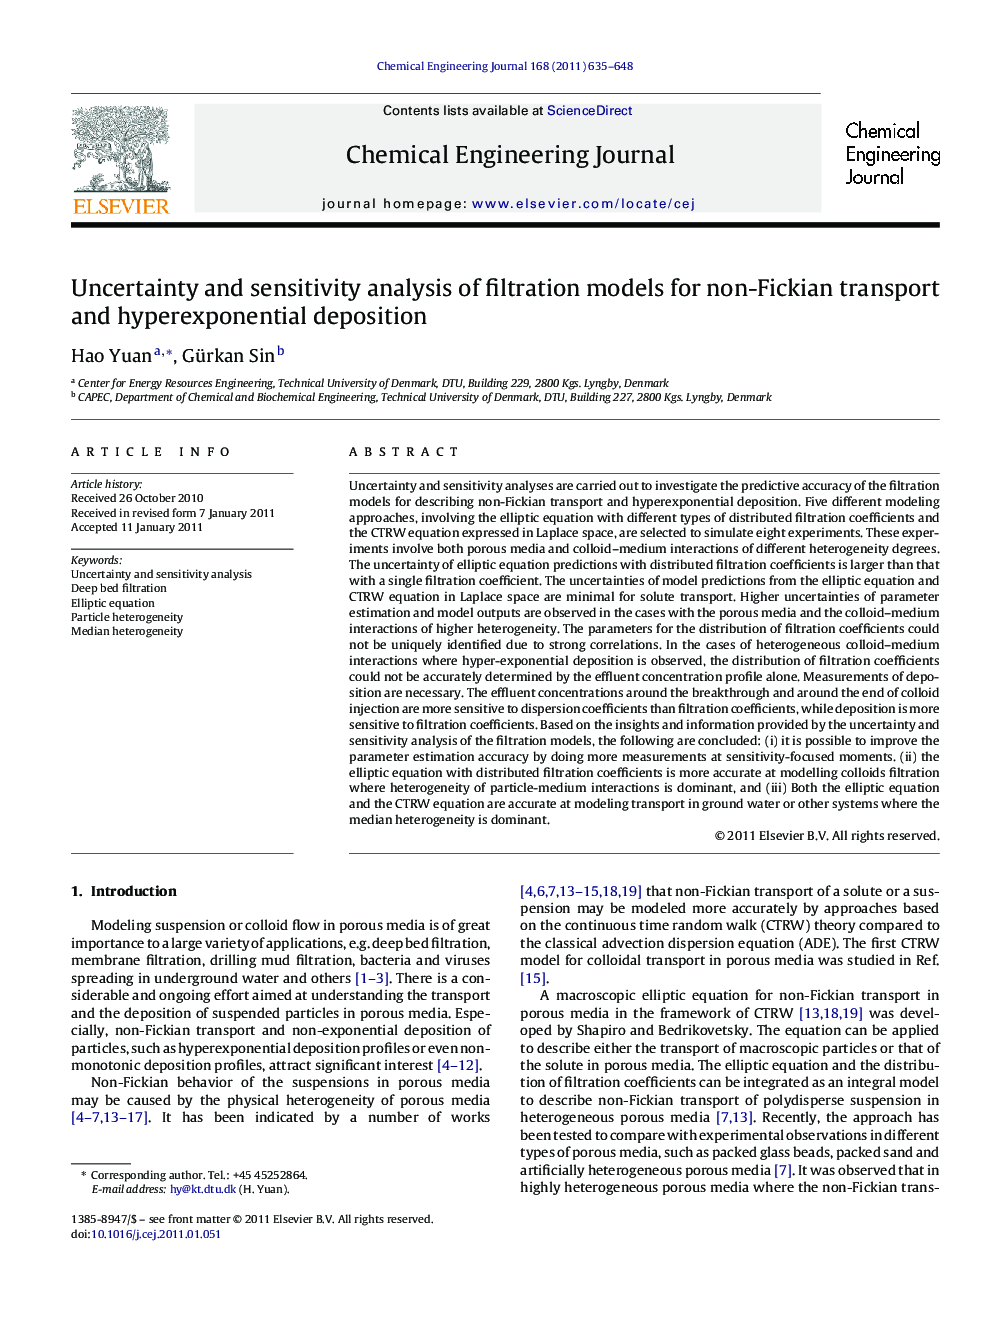 Uncertainty and sensitivity analysis of filtration models for non-Fickian transport and hyperexponential deposition